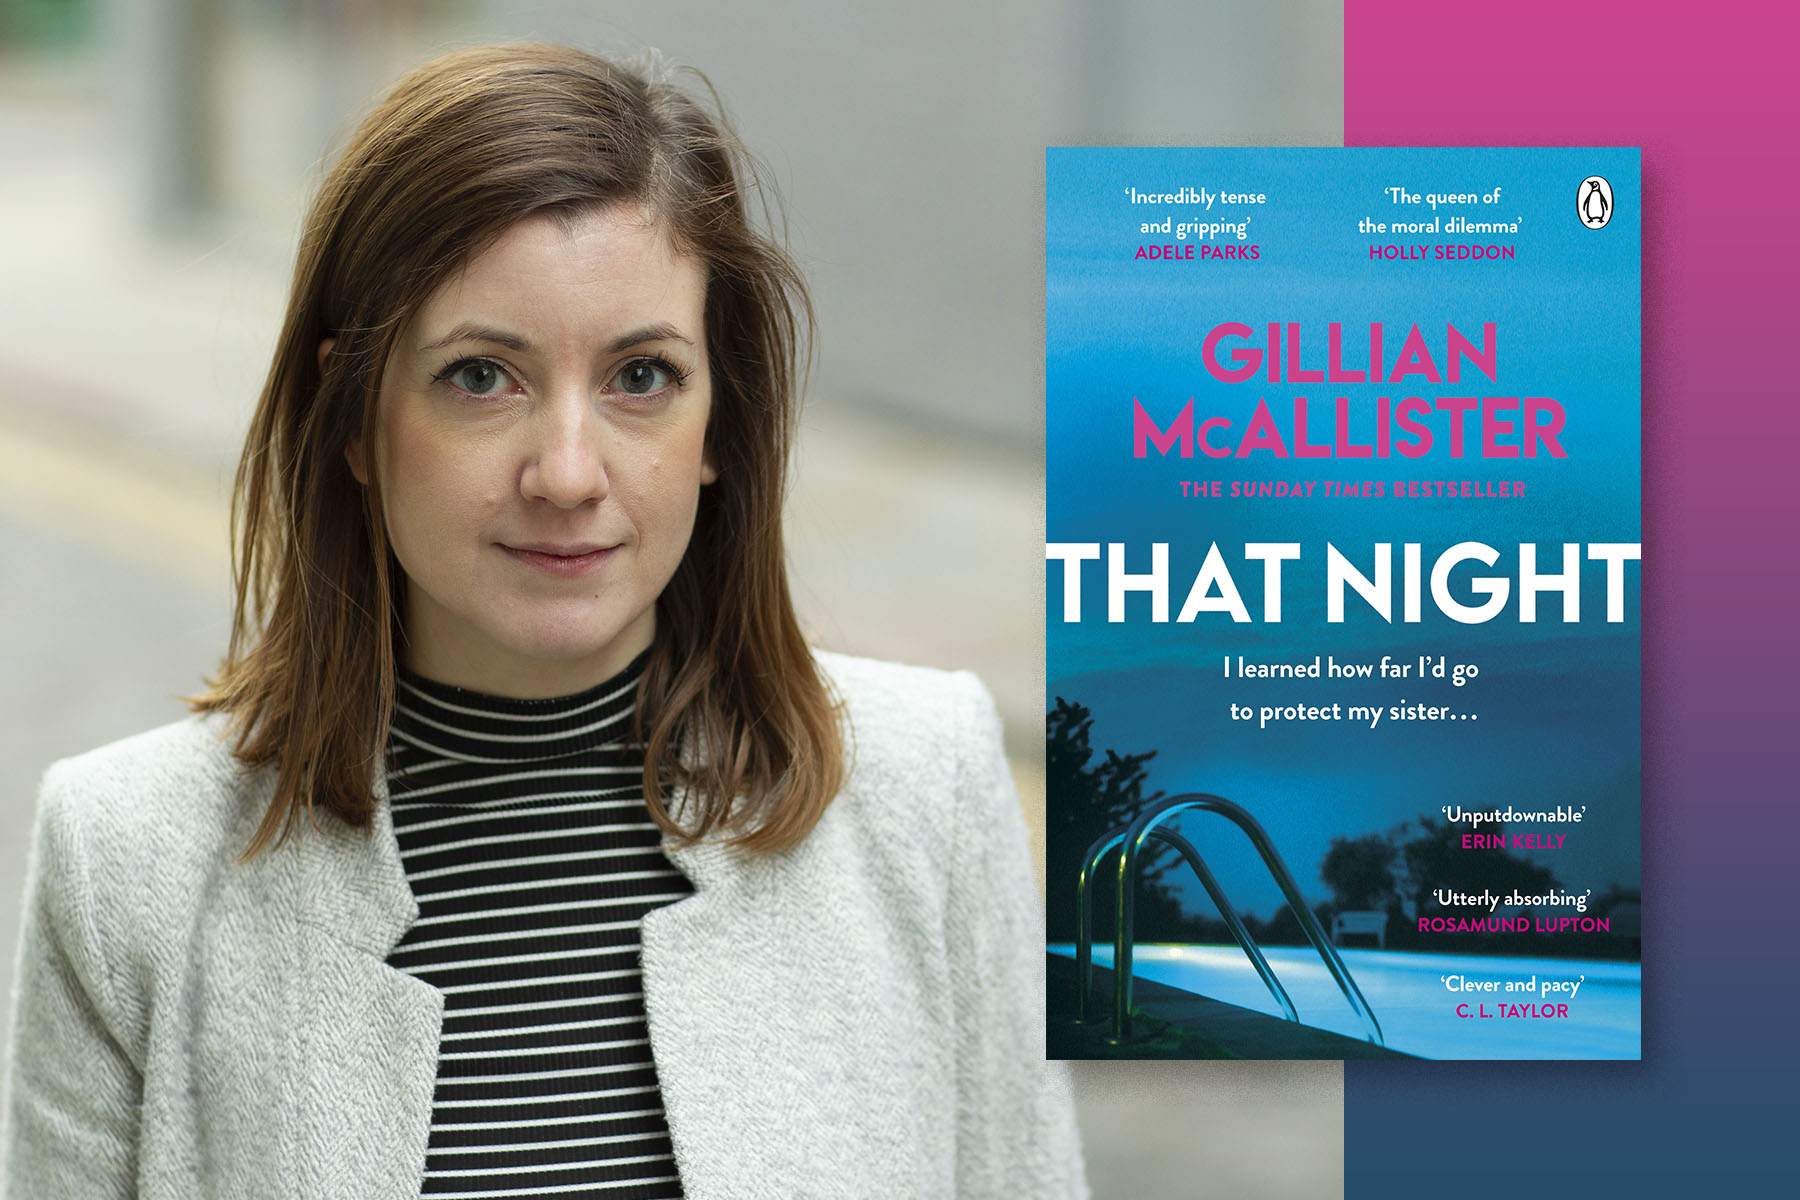 A side-by-side image of a photograph of Gillian McAllister next to the cover of her book